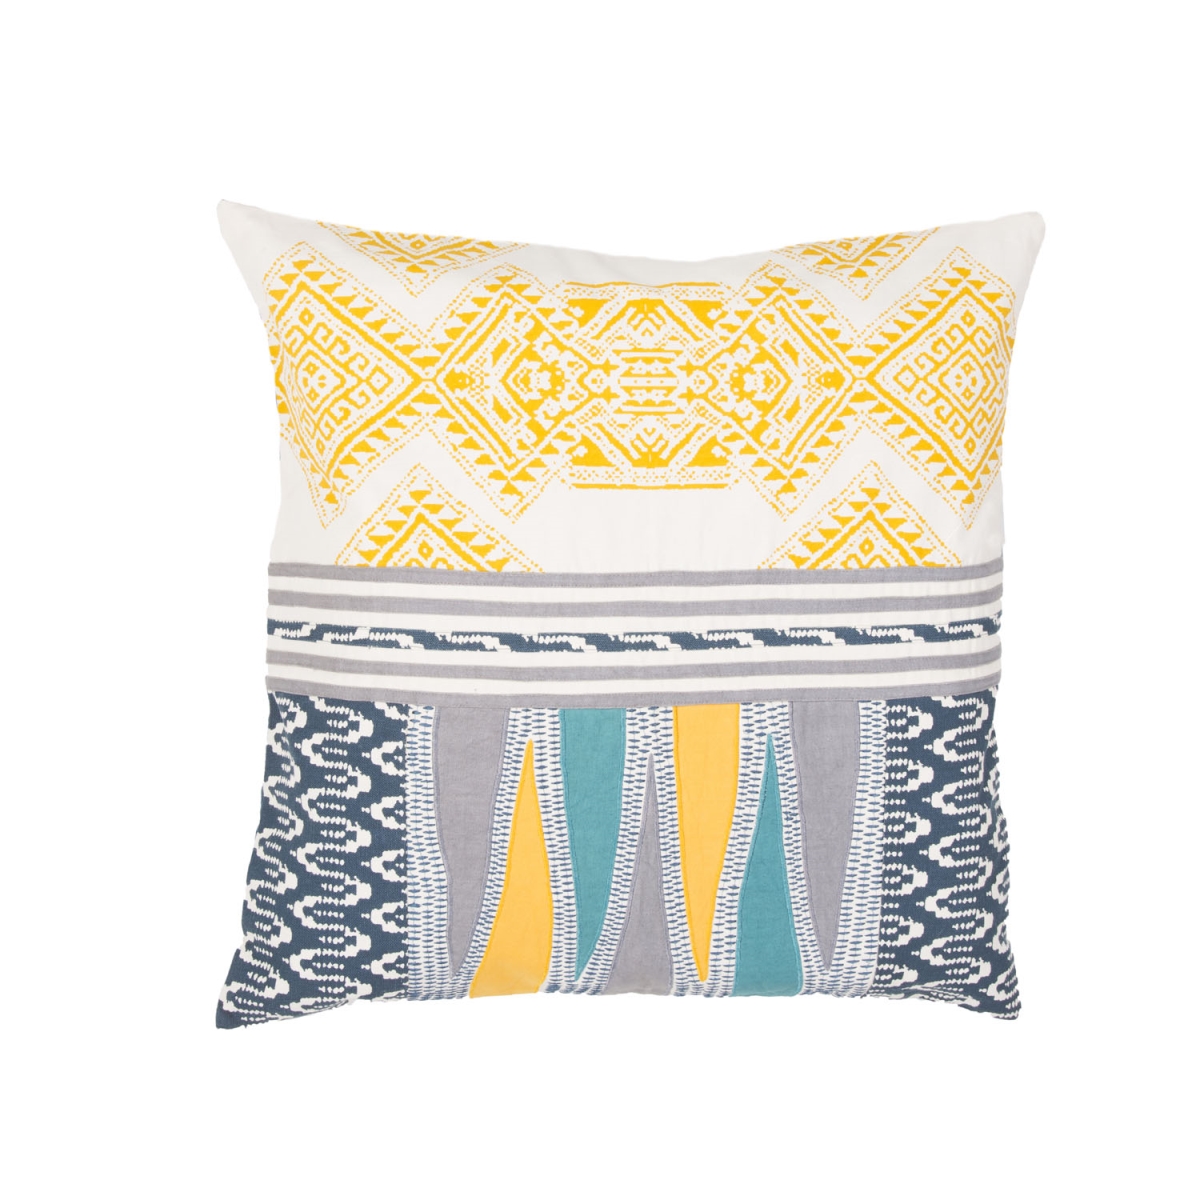 Plw102294 22 X 22 In. Traditions Made Modern Pillows Museum Ifa Mesa Yellow & Teal Geometric Down Throw Pillow